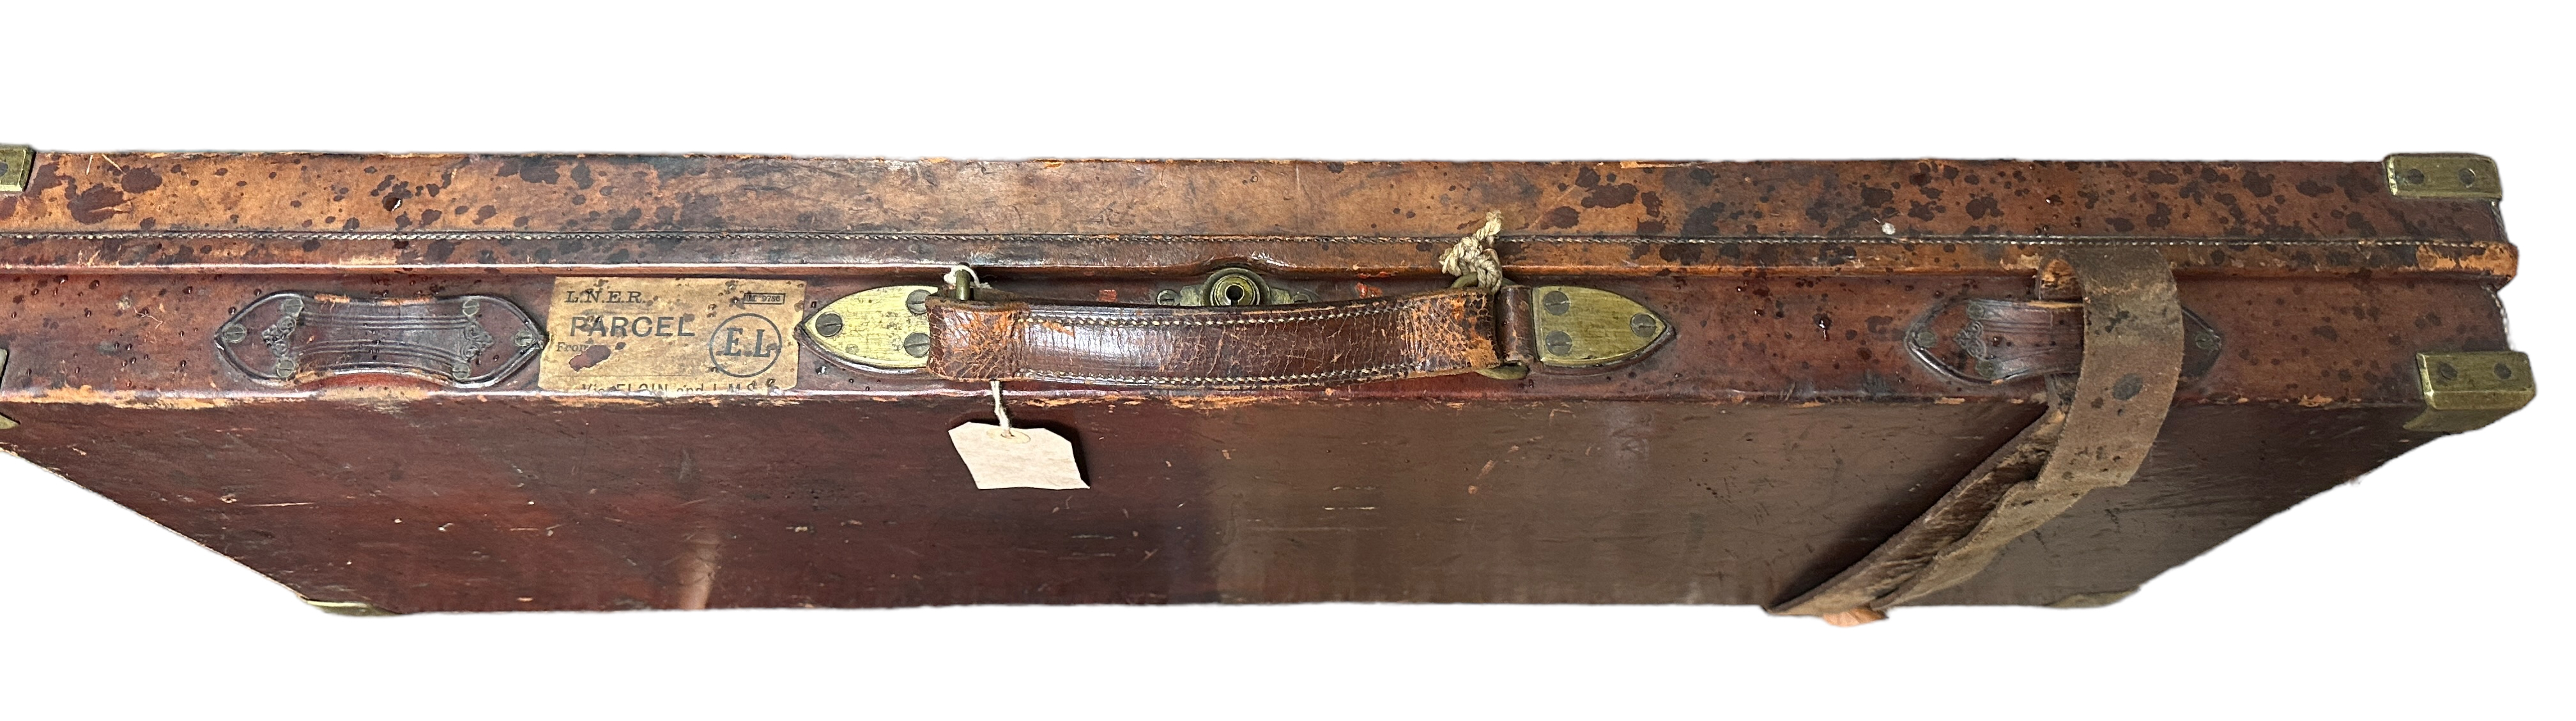 Antique J Graham Inverness Leather and Wood Gun Case - 33 1/2" x 12 3/8" x 3 1/4" - Image 2 of 6